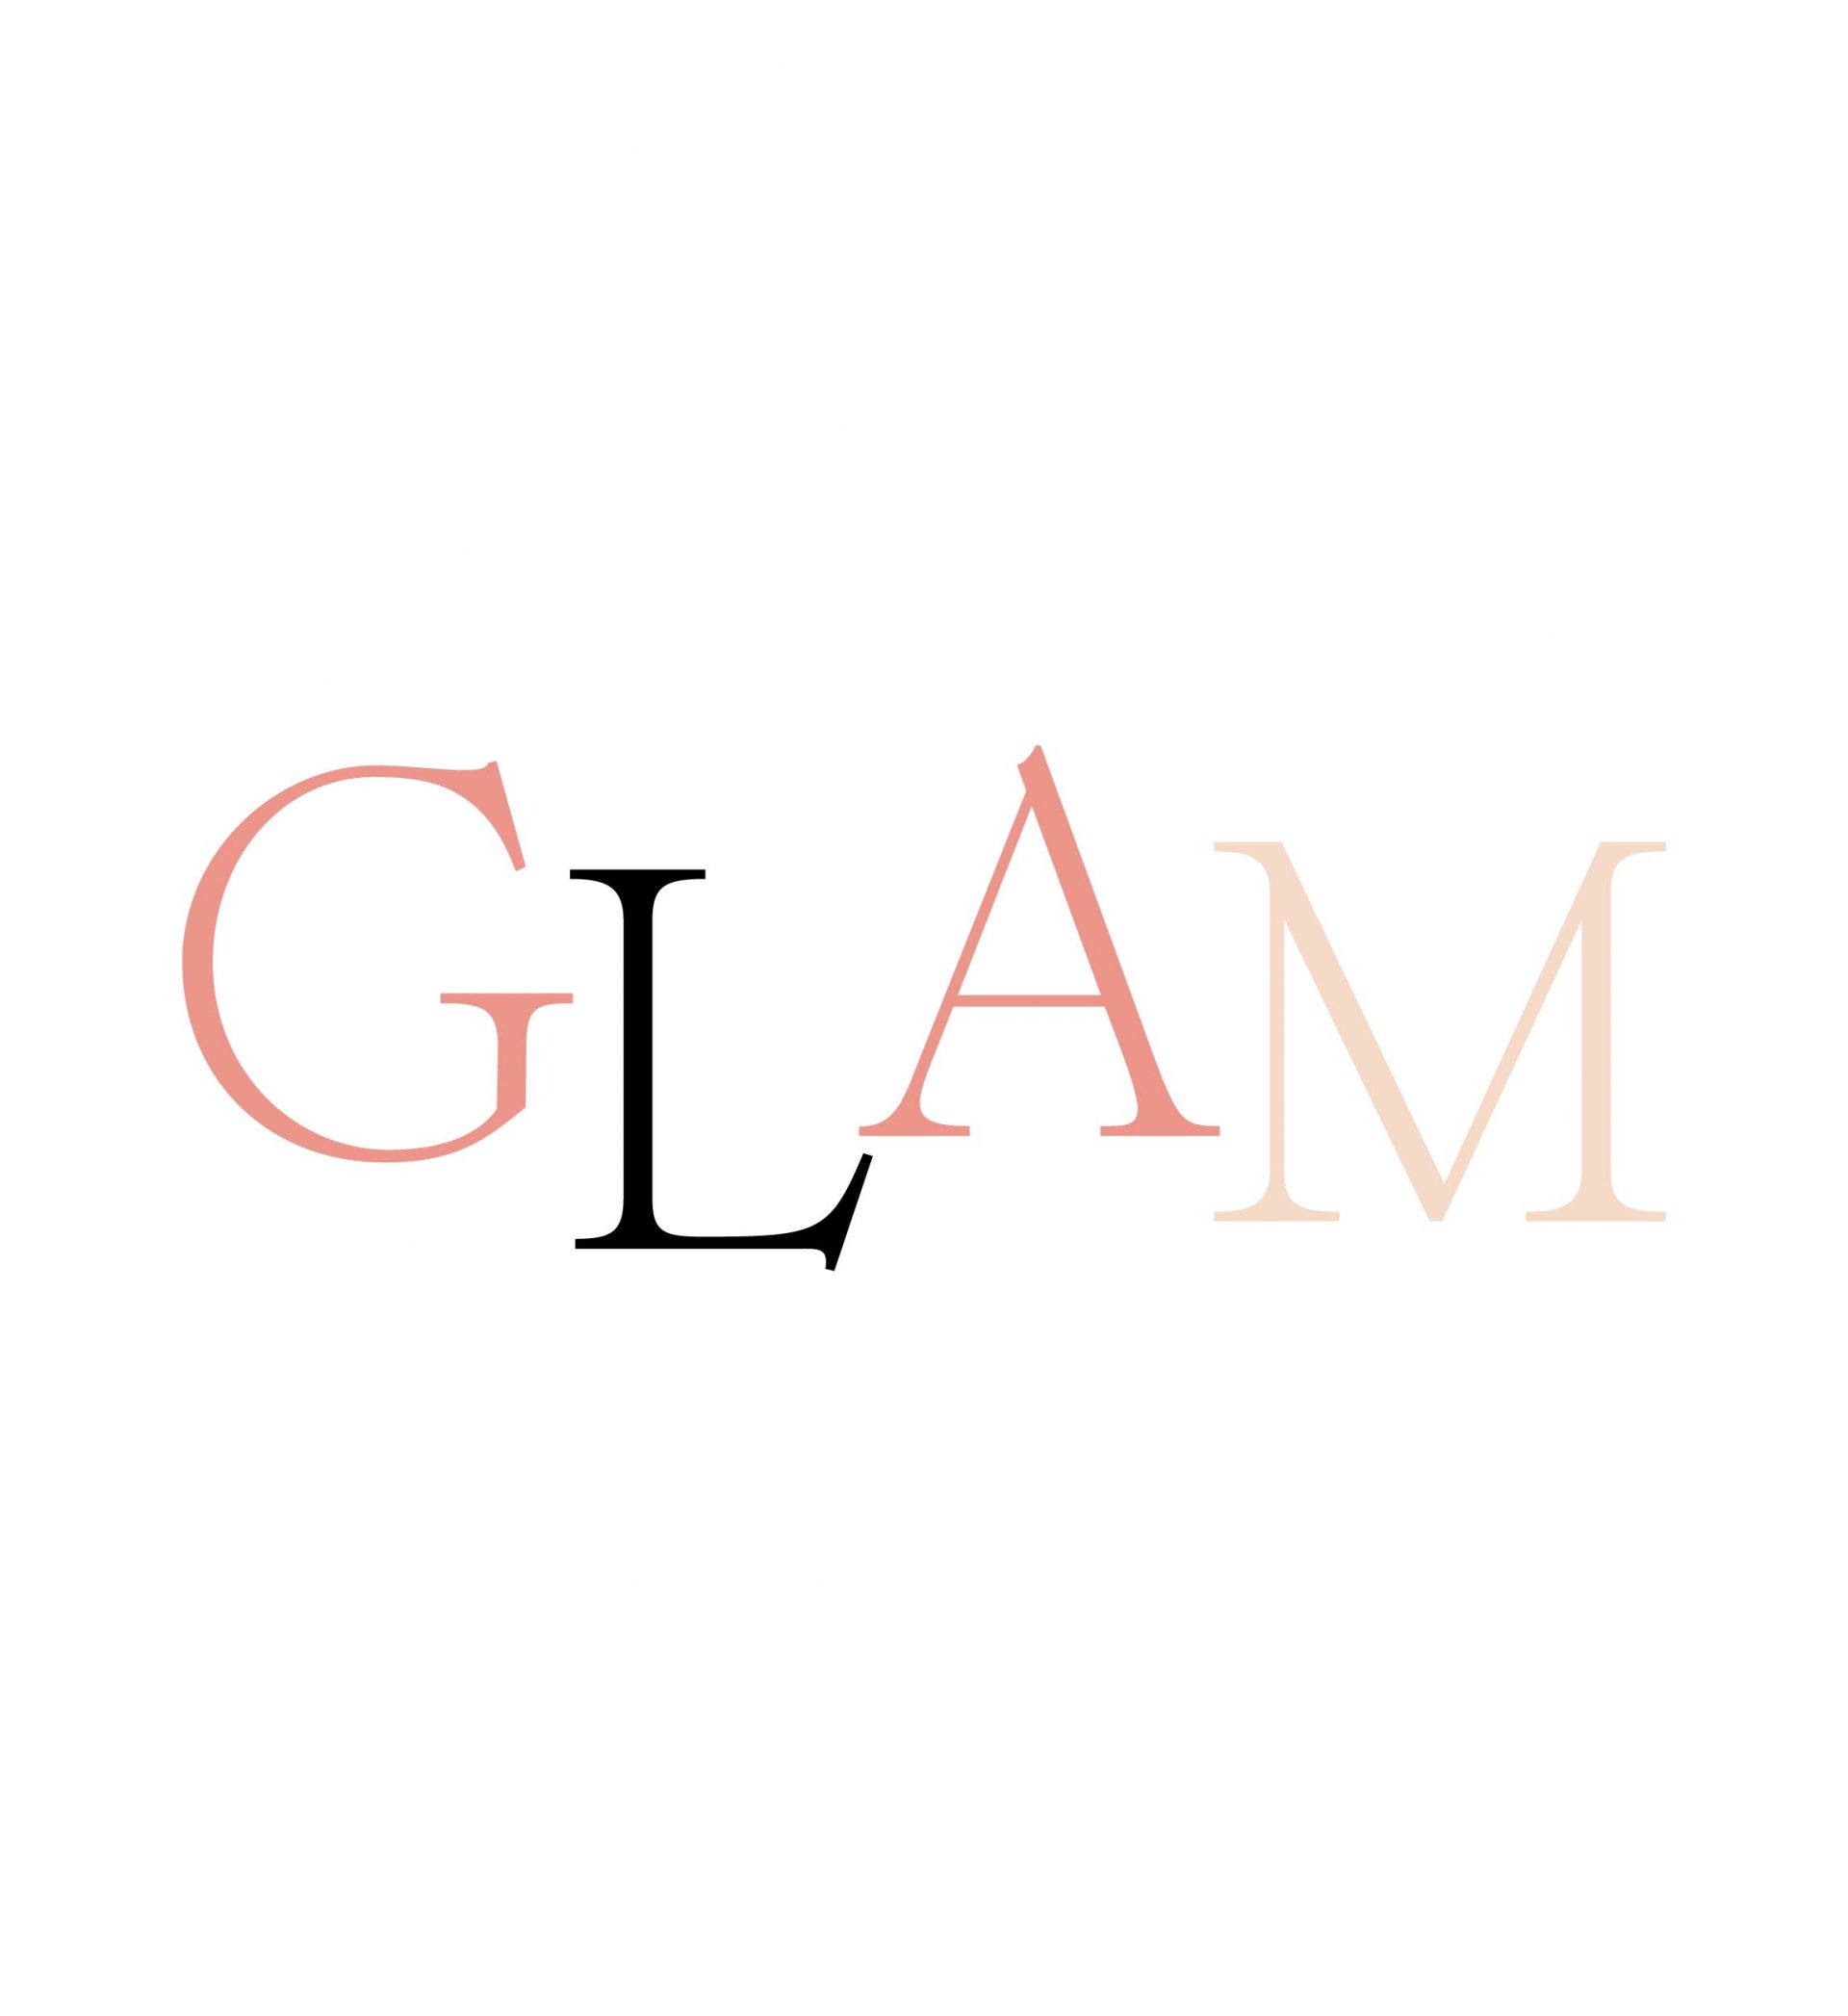 What is the glam style?